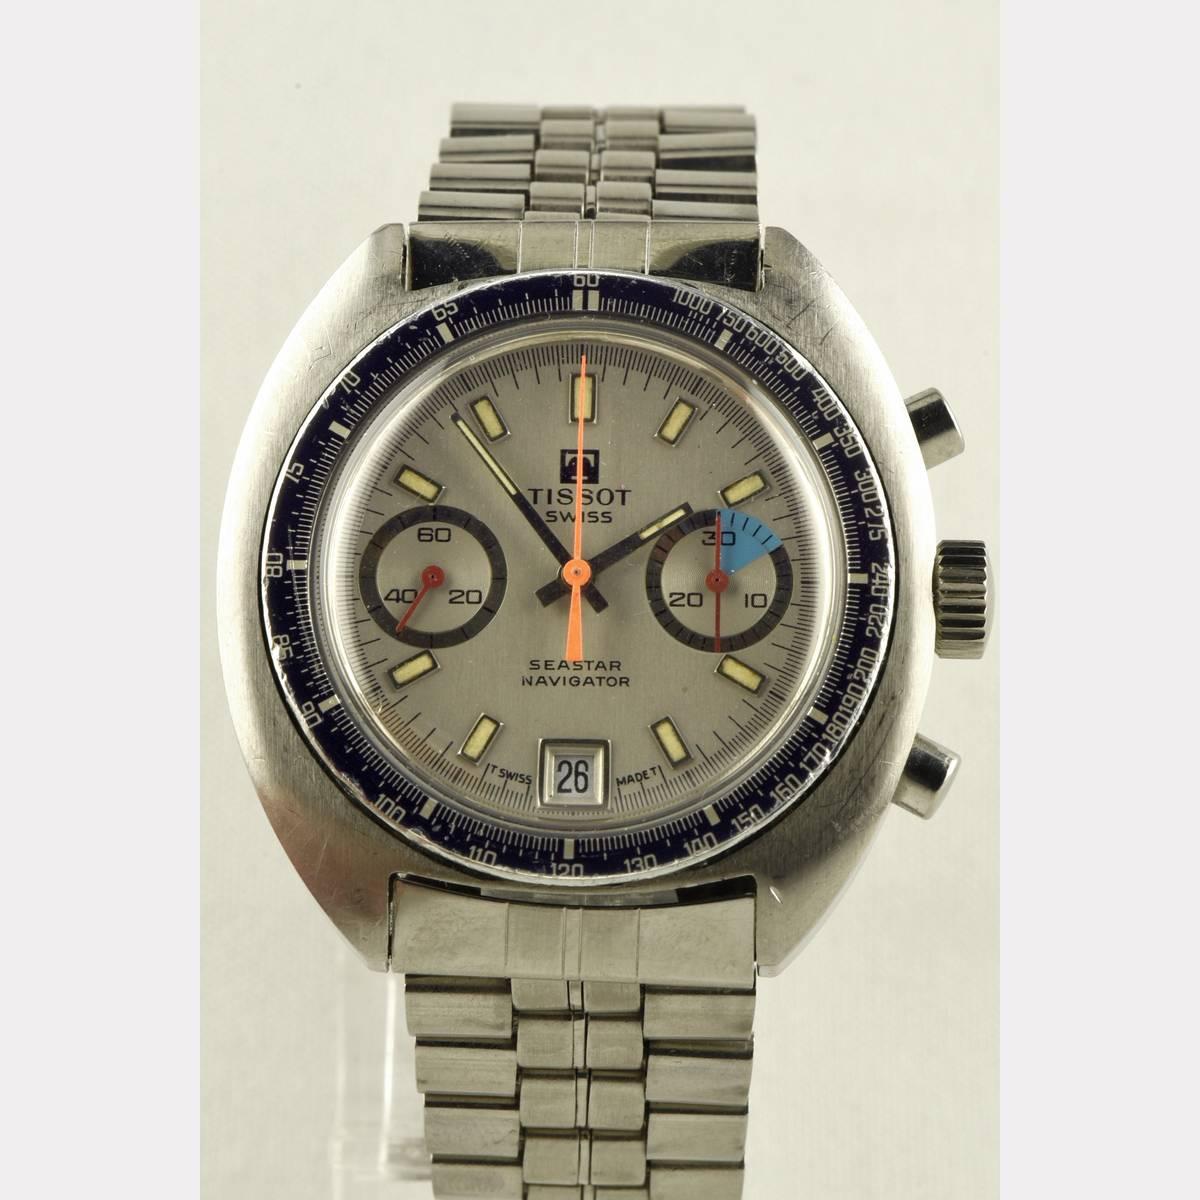 A  strong wristwatch TISSOT produced around 1970 with the chronograph SEASTAR NAVIGATOR. Also according to today's standards, here is a real men's watch, the solid Valjoux manufactory movement is well preserved and freshly overhauled here.
Sporty,